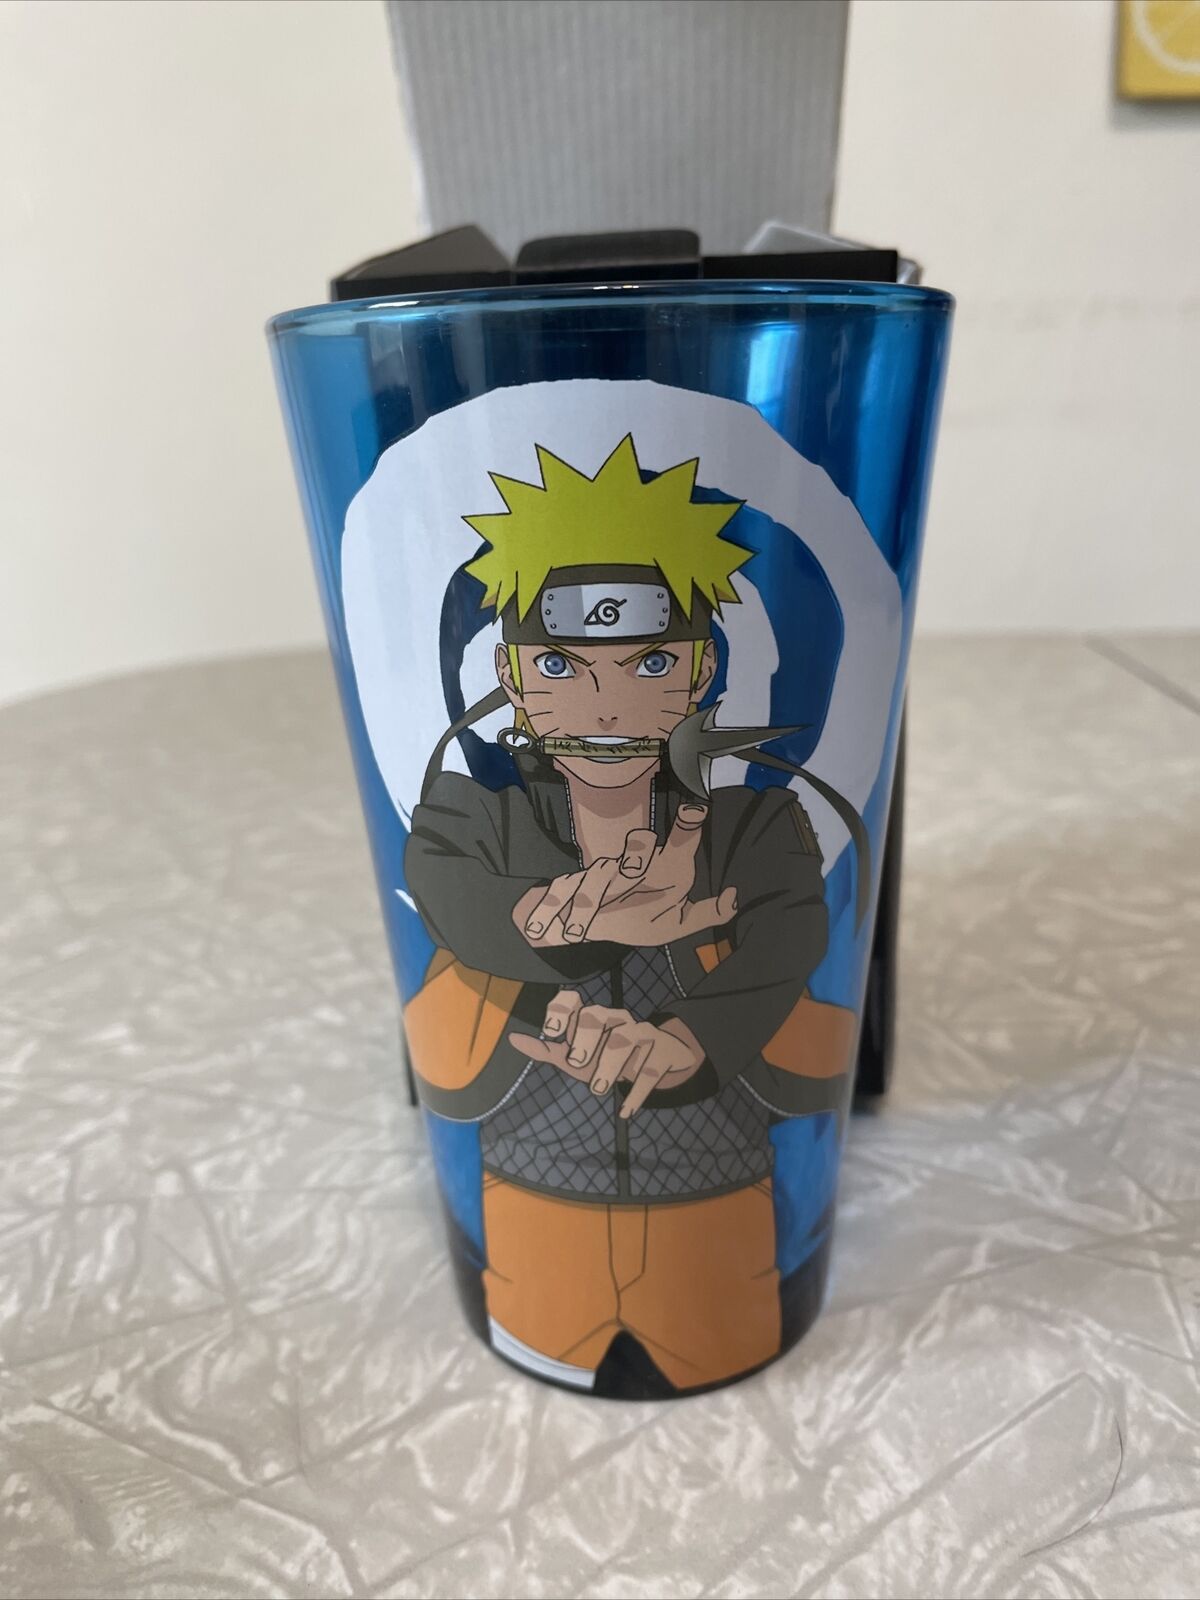 NARUTO Shippuden Official Blue Drink Glass Tumbler Loot Crate Just Funky Anime